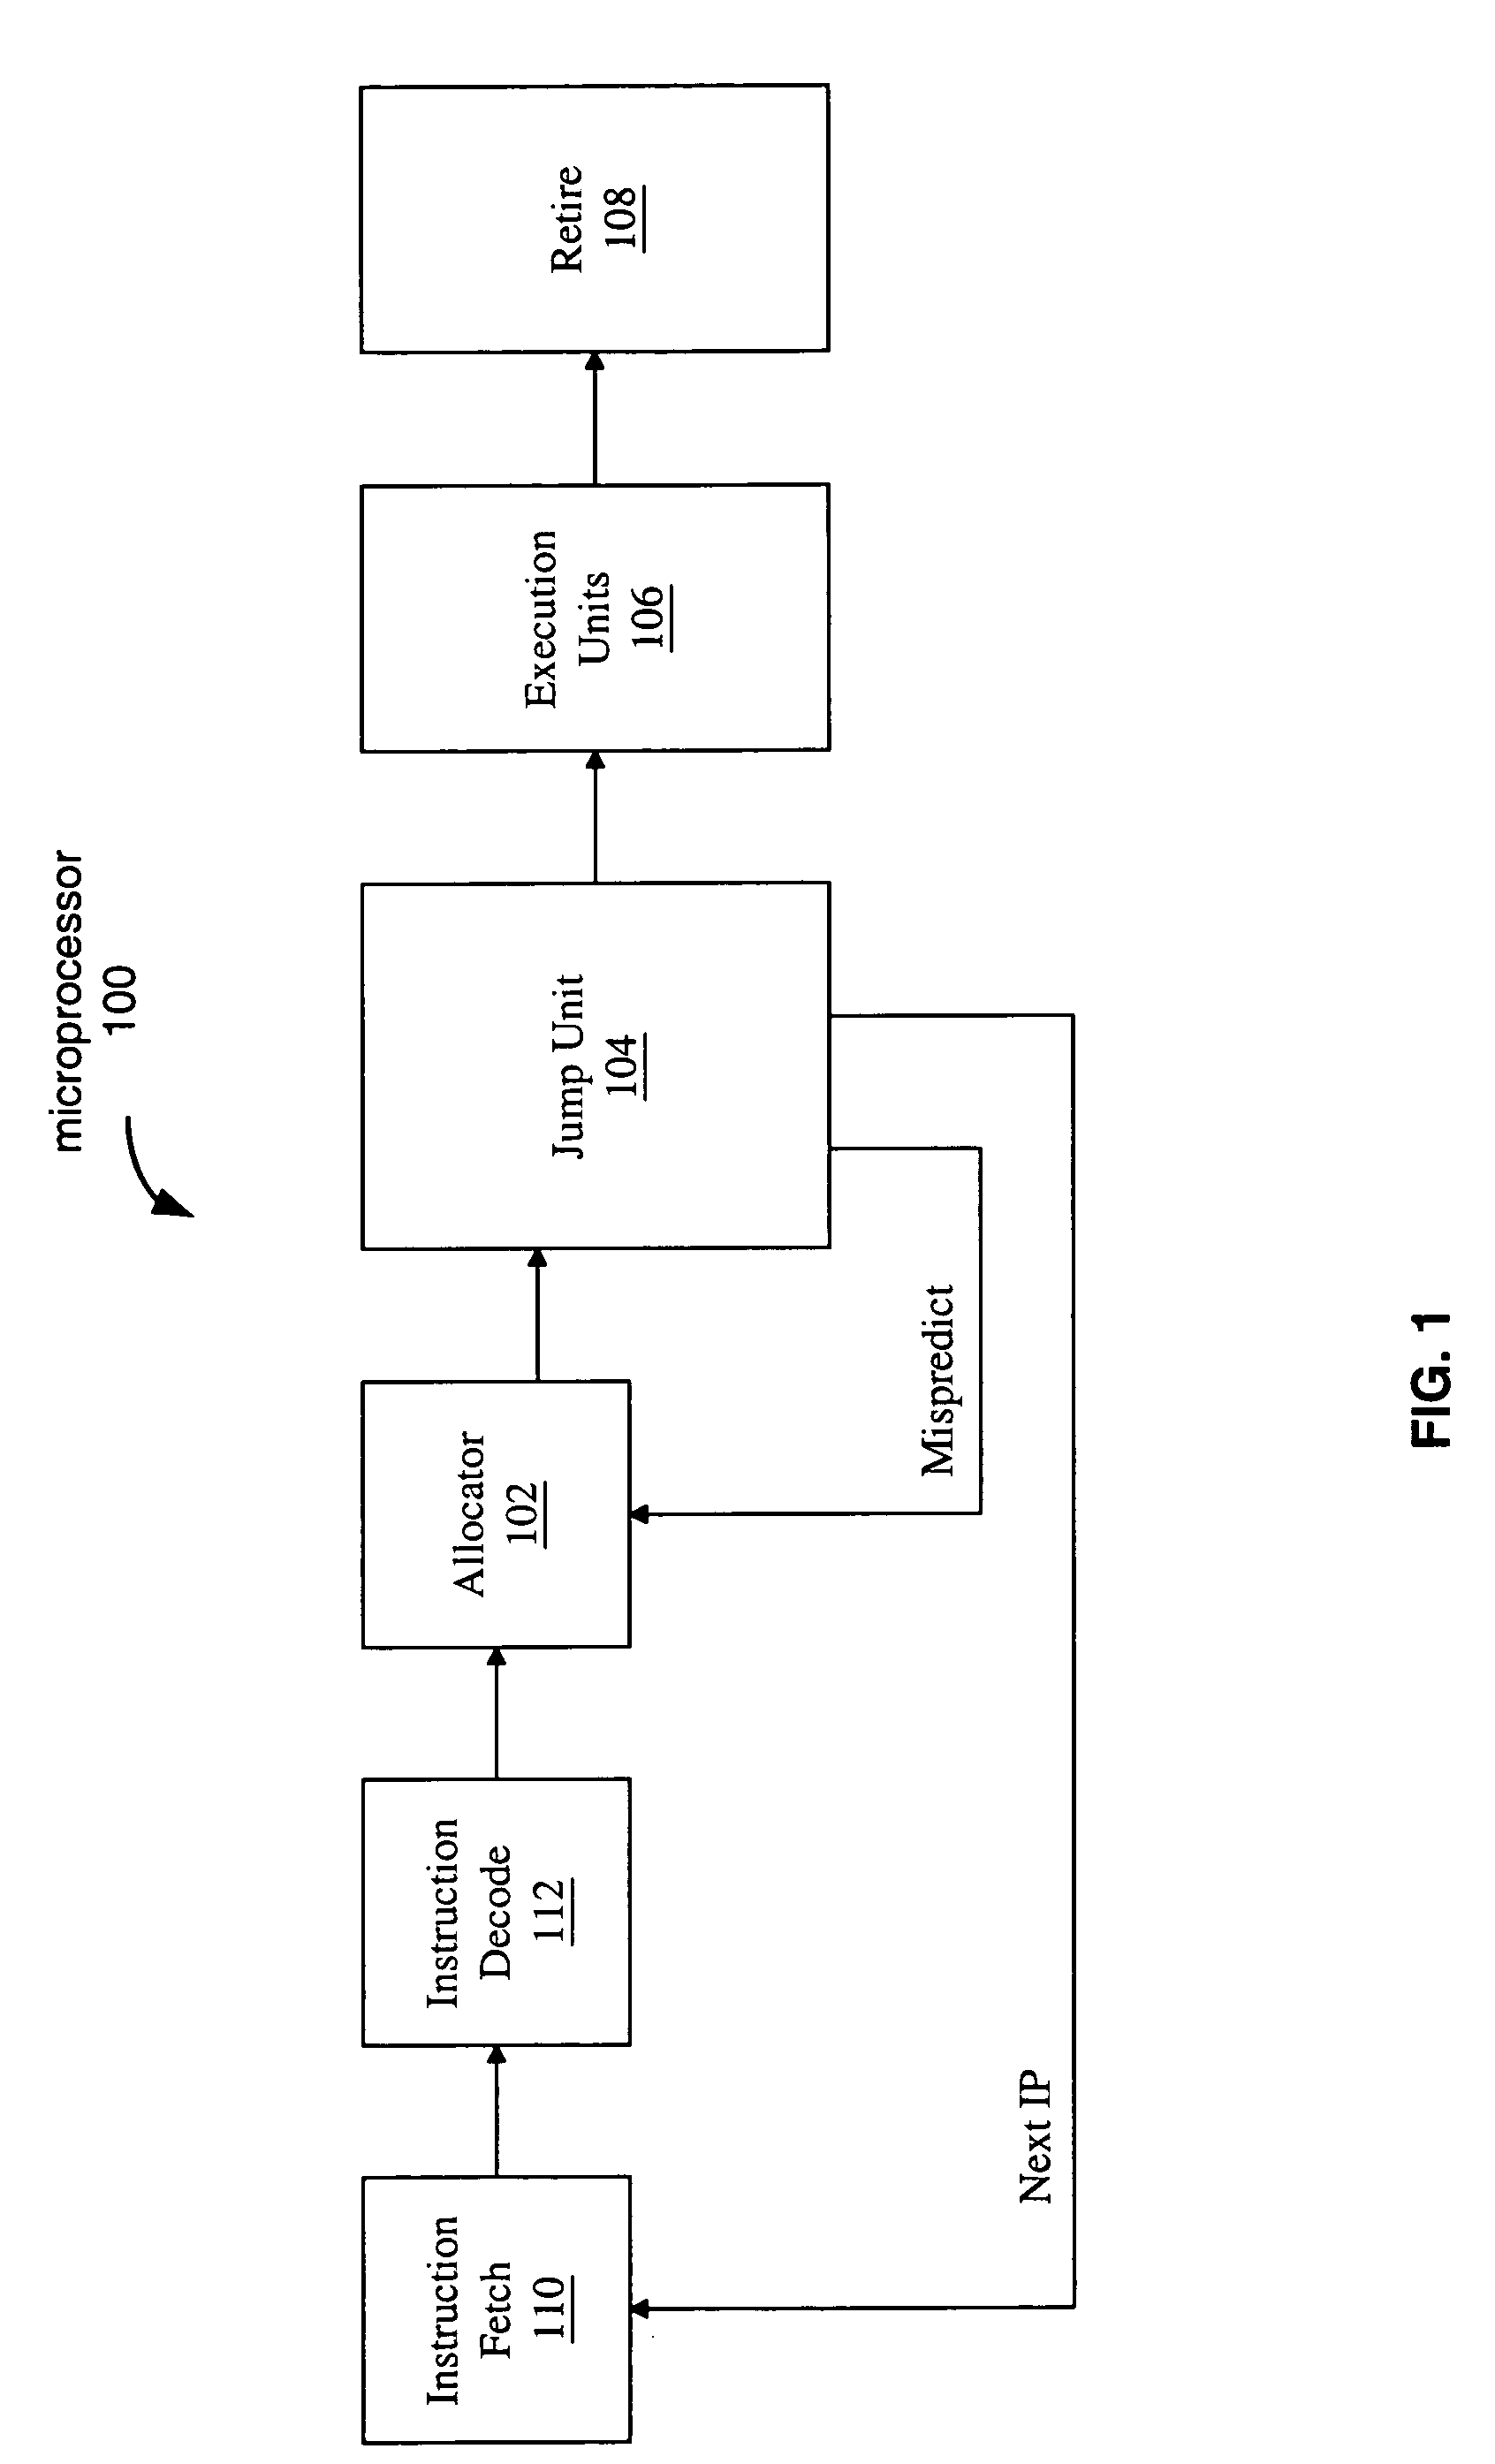 Method and system for multiple branch paths in a microprocessor